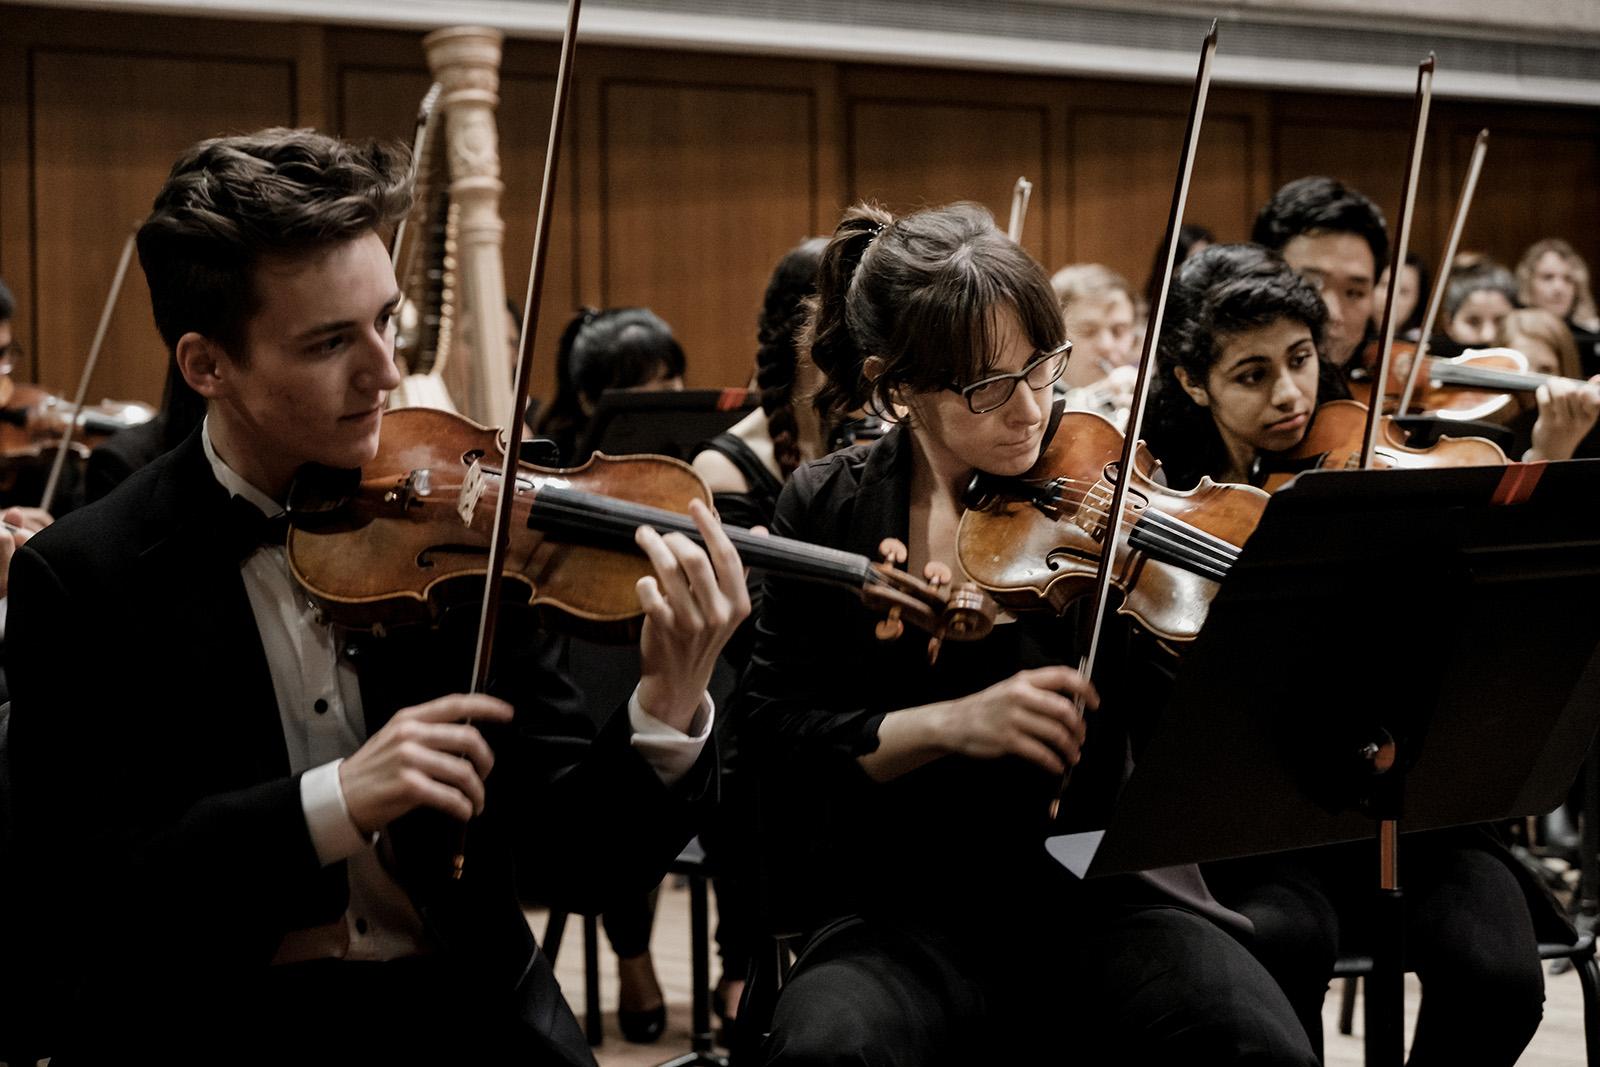 Symphony Orchestra violinists performing in Bates Recital Hall